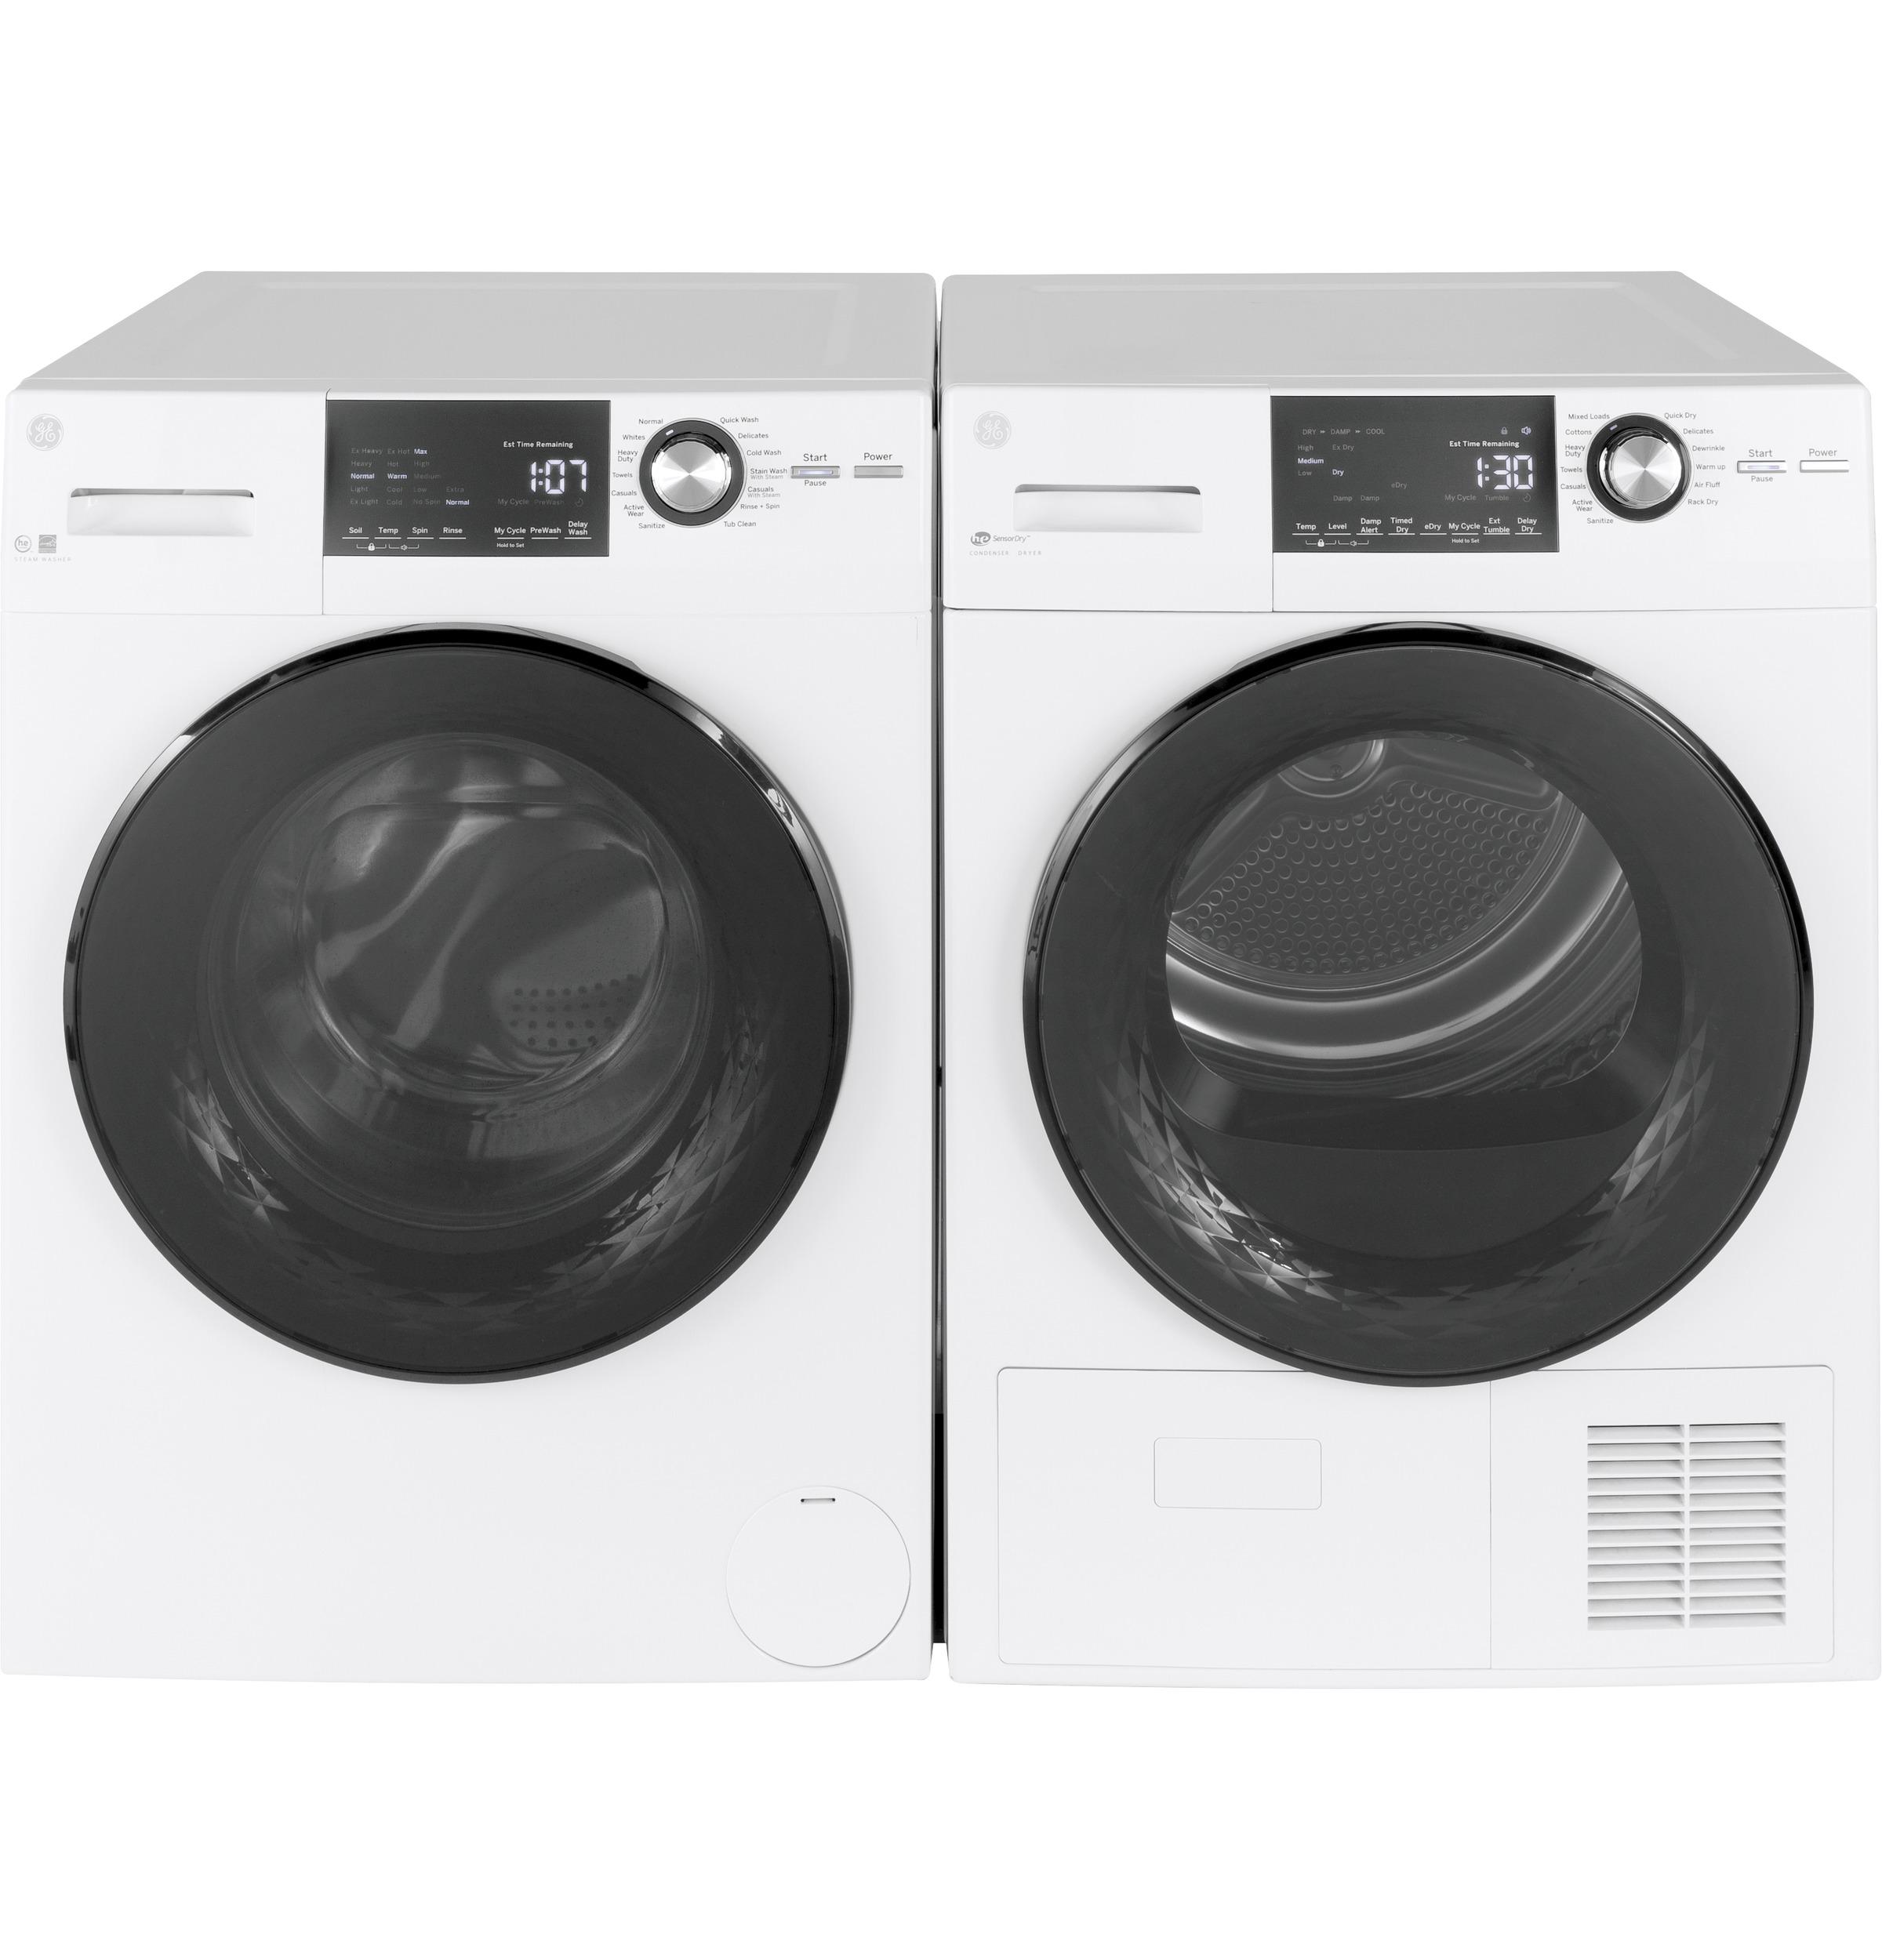 GENERAL ELECTRIC GFW148SSMWW 24 Frontload Washer with Steam 2.4 cu. ft. Capacity Plugs into Dryer or Wall Energy Star Electronic Touch Controls in White - image 4 of 5